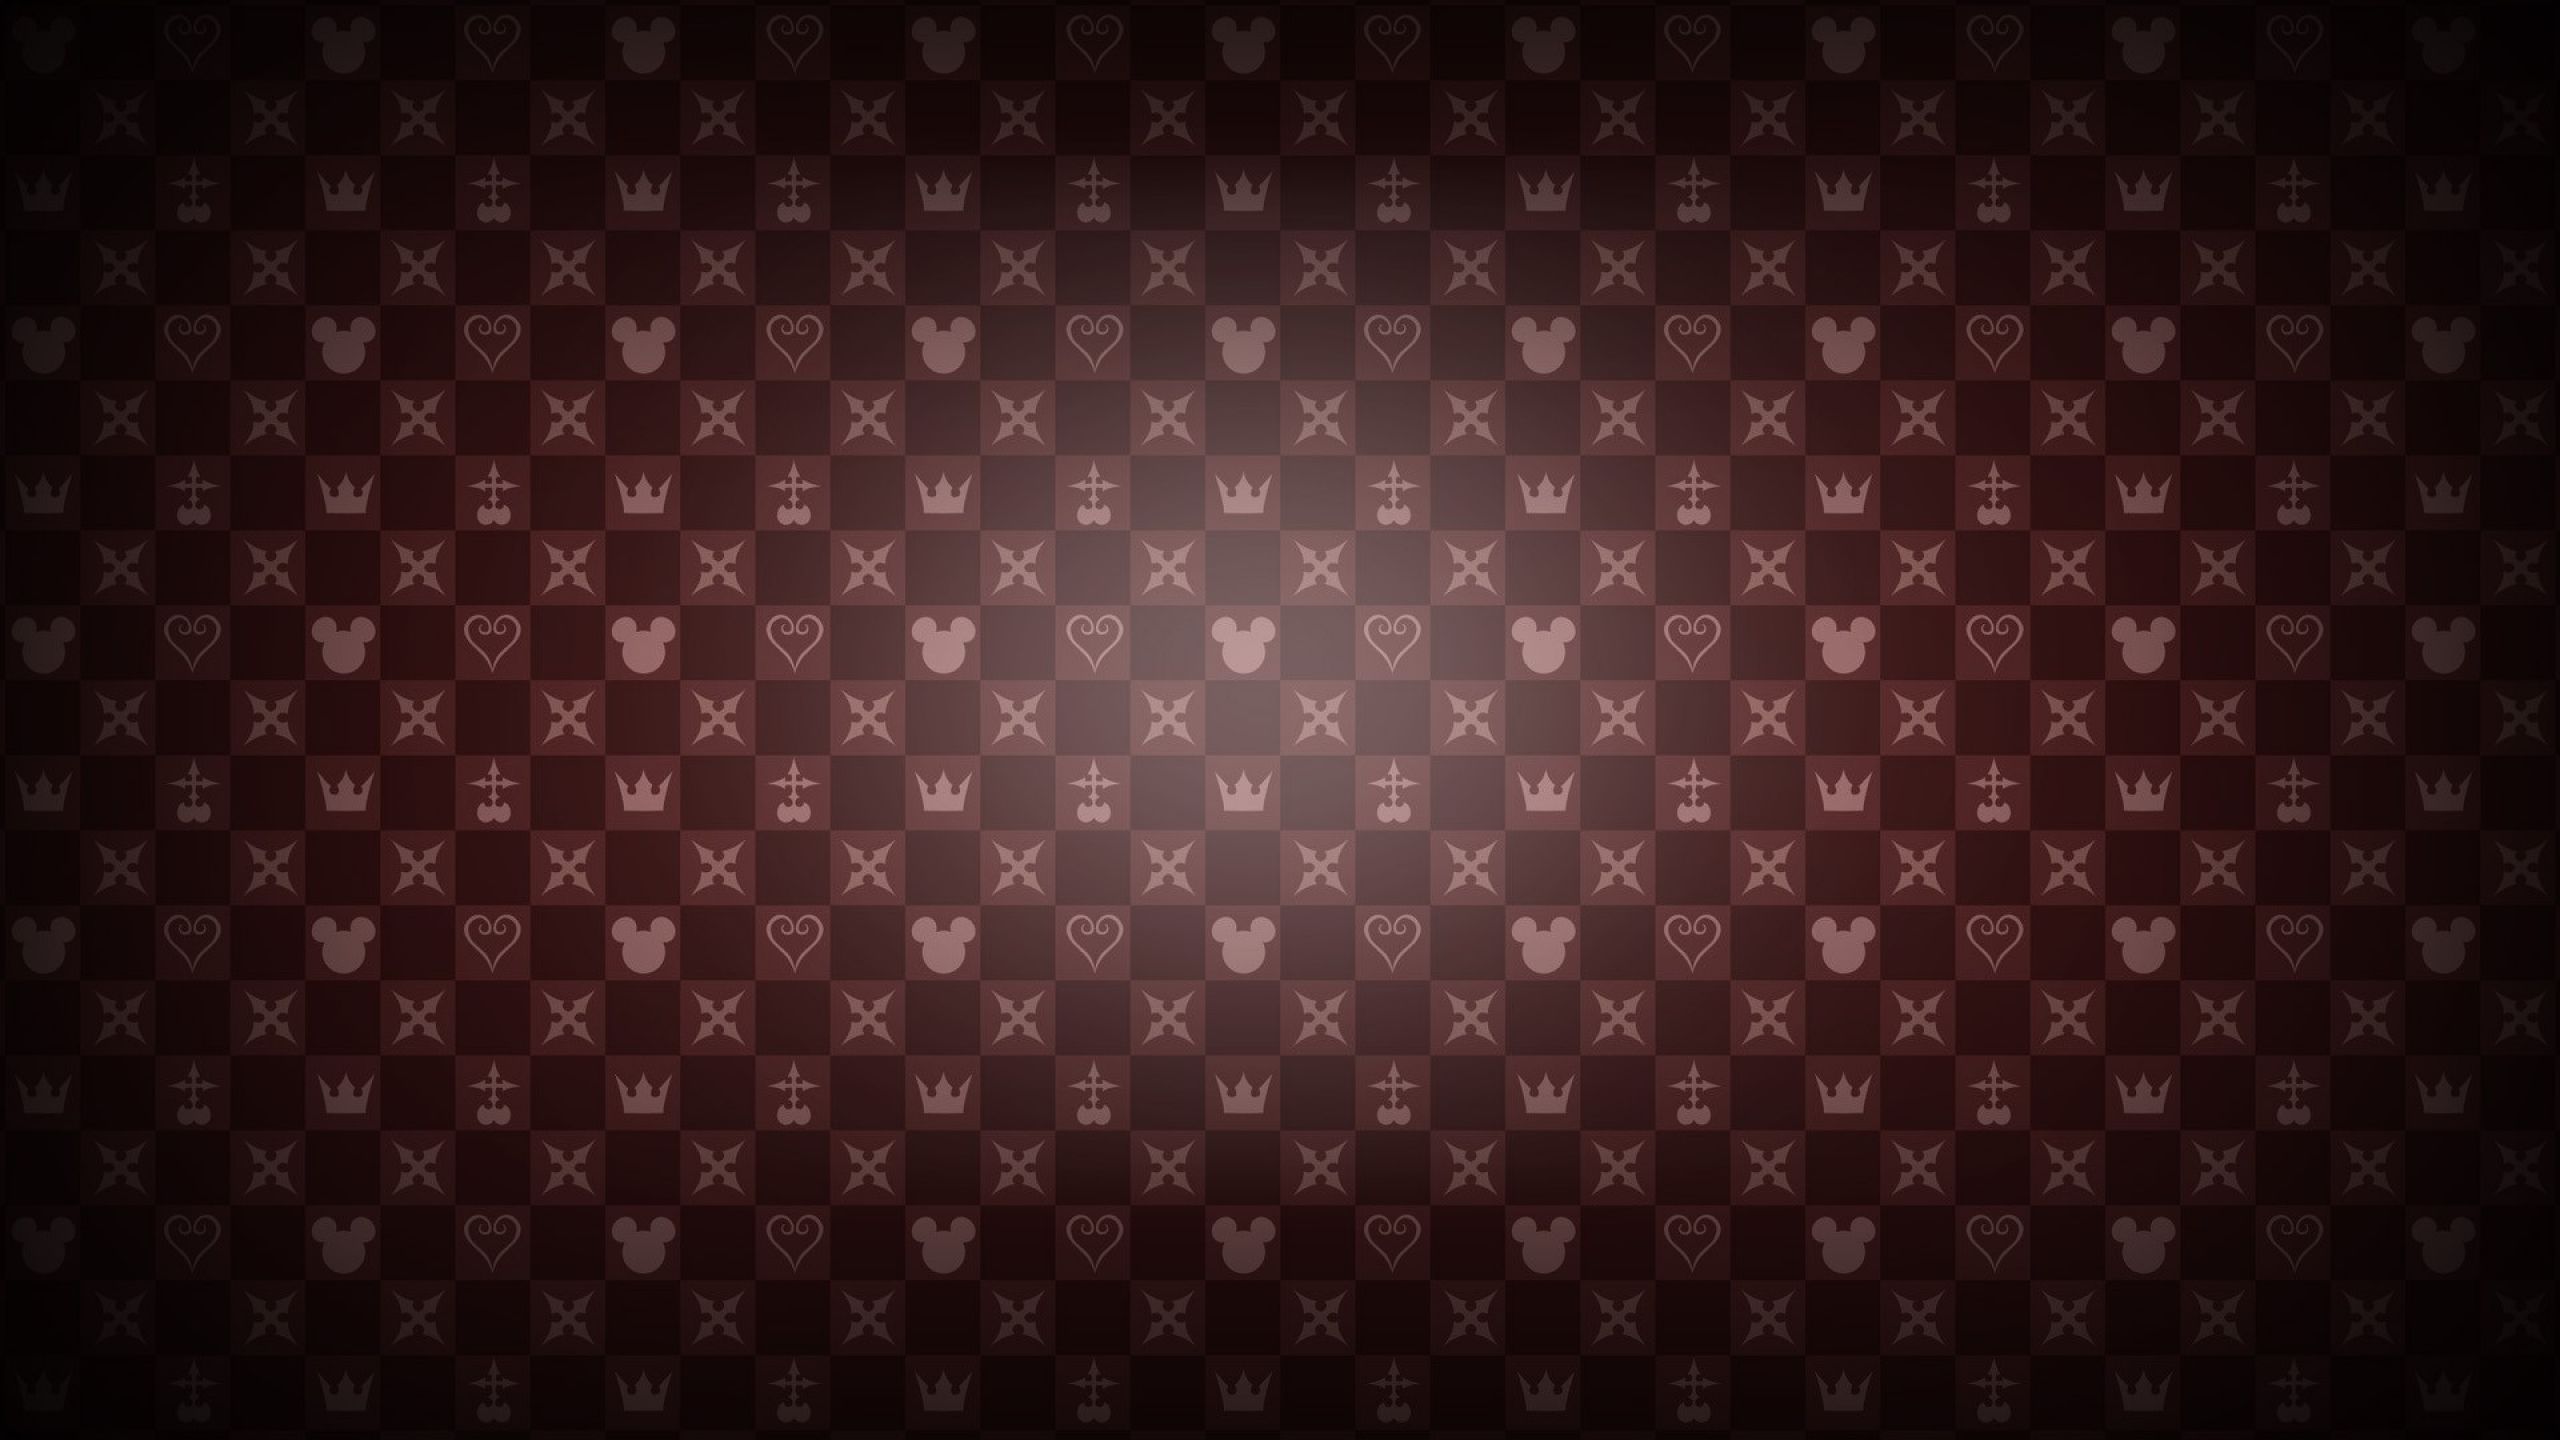 Download Wallpaper, Download 2560x1440 kingdom hearts minimalistic red patterns mosaic mickey mouse he. Kingdom hearts wallpaper, Kingdom hearts, Heart wallpaper